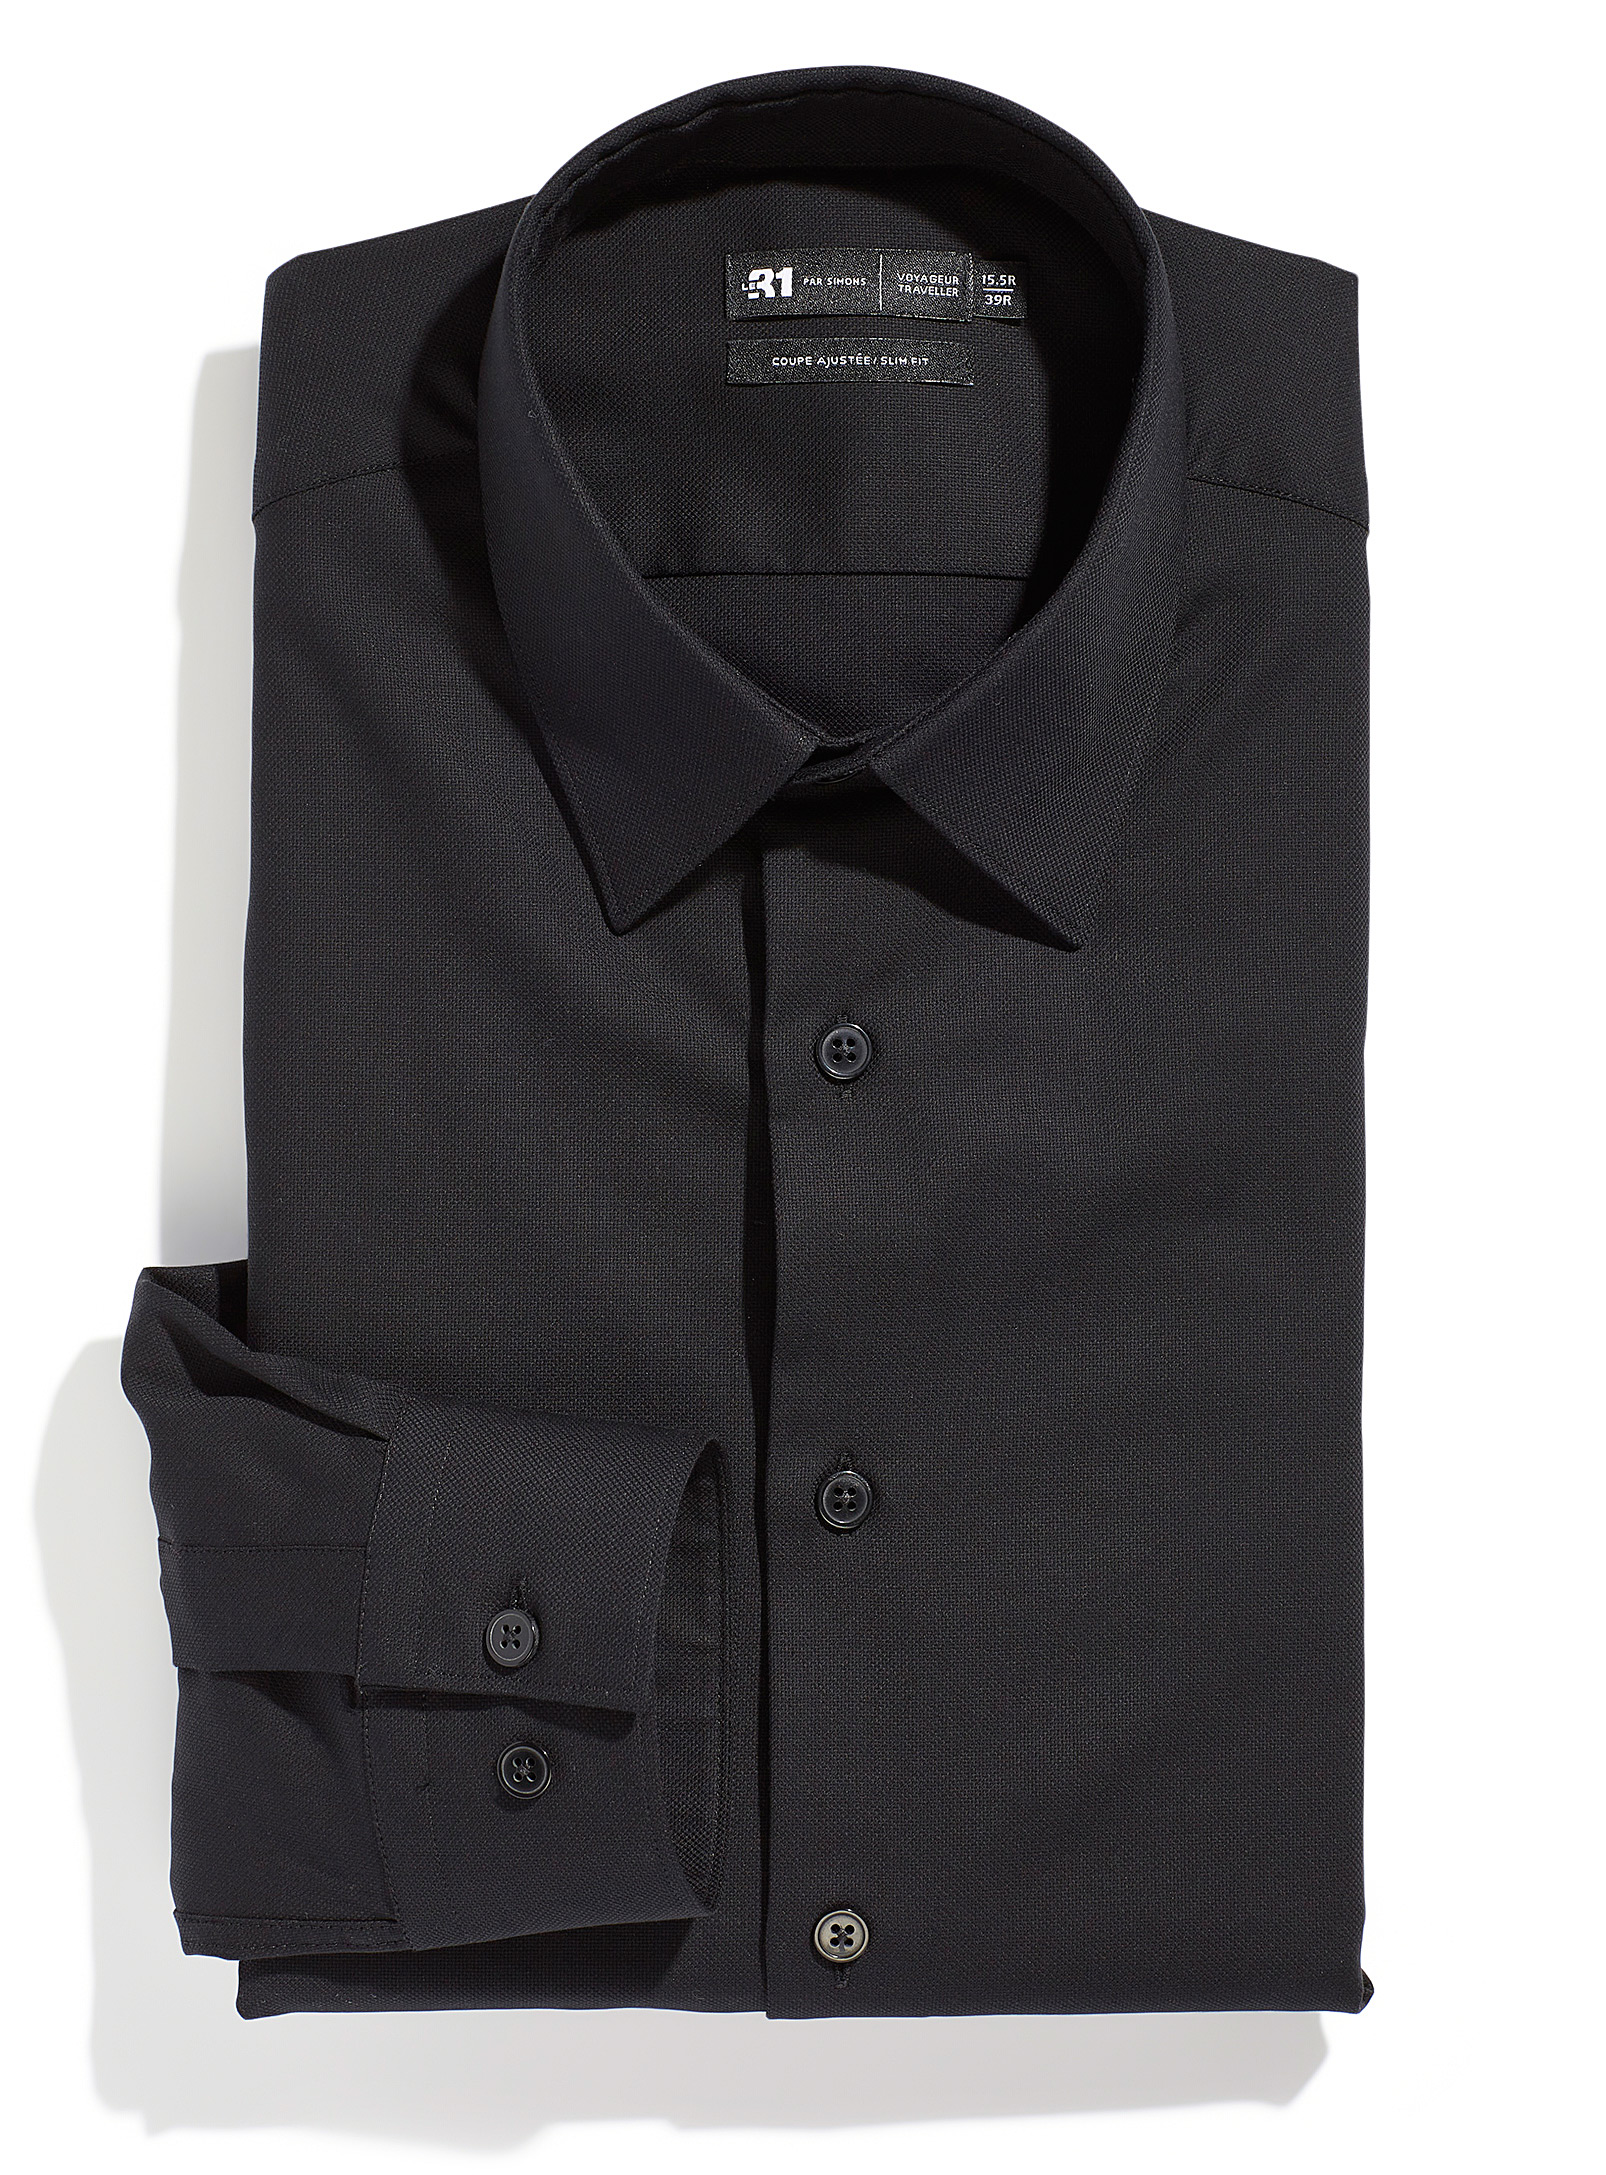 Le 31 Stretch Piqué Performance Shirt Slim Fit Innovation Collection In Black